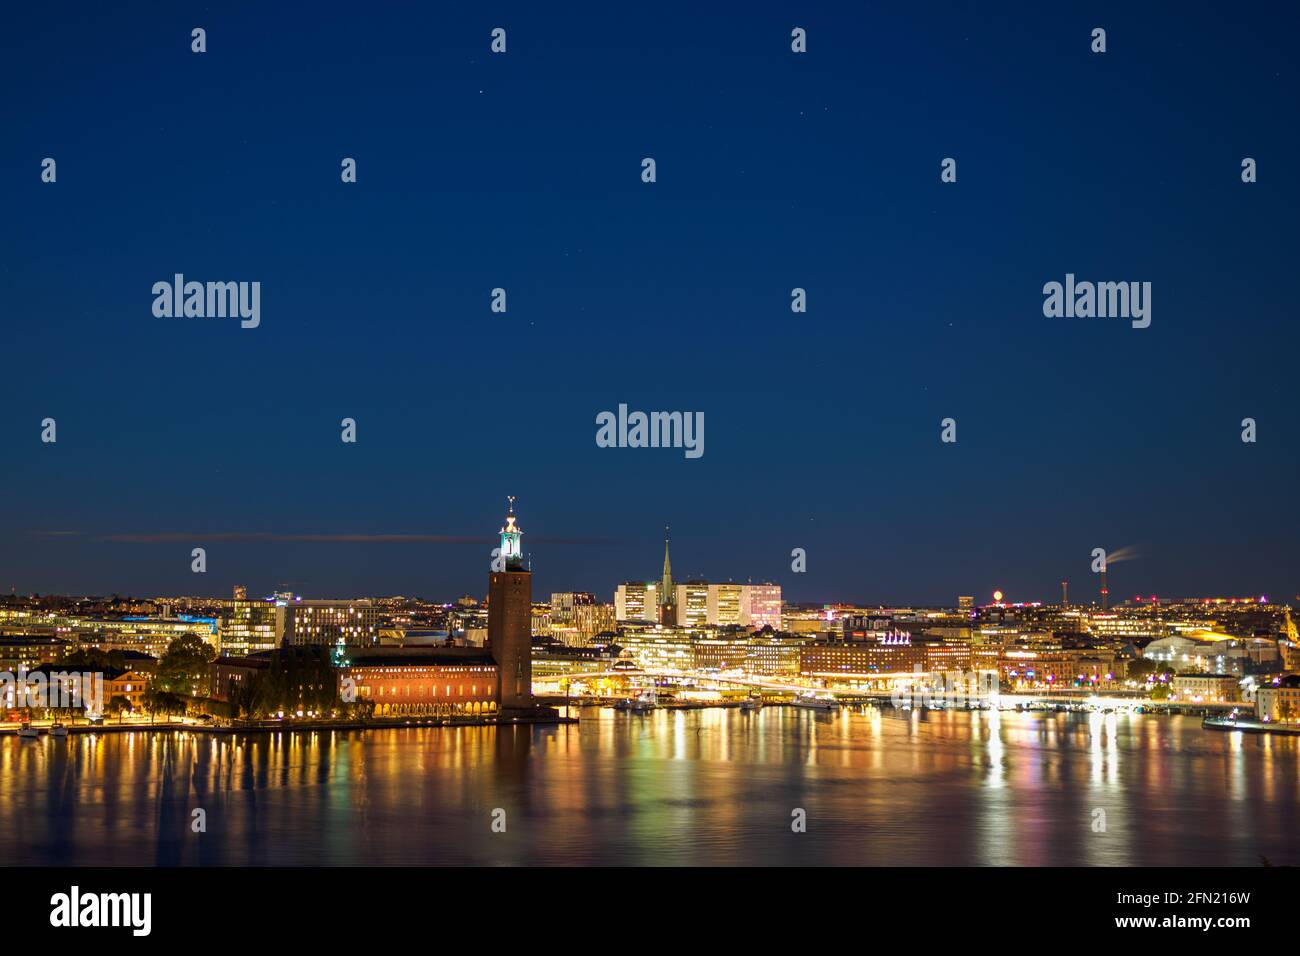 Page 3 - Söderström High Resolution Stock Photography and Images - Alamy